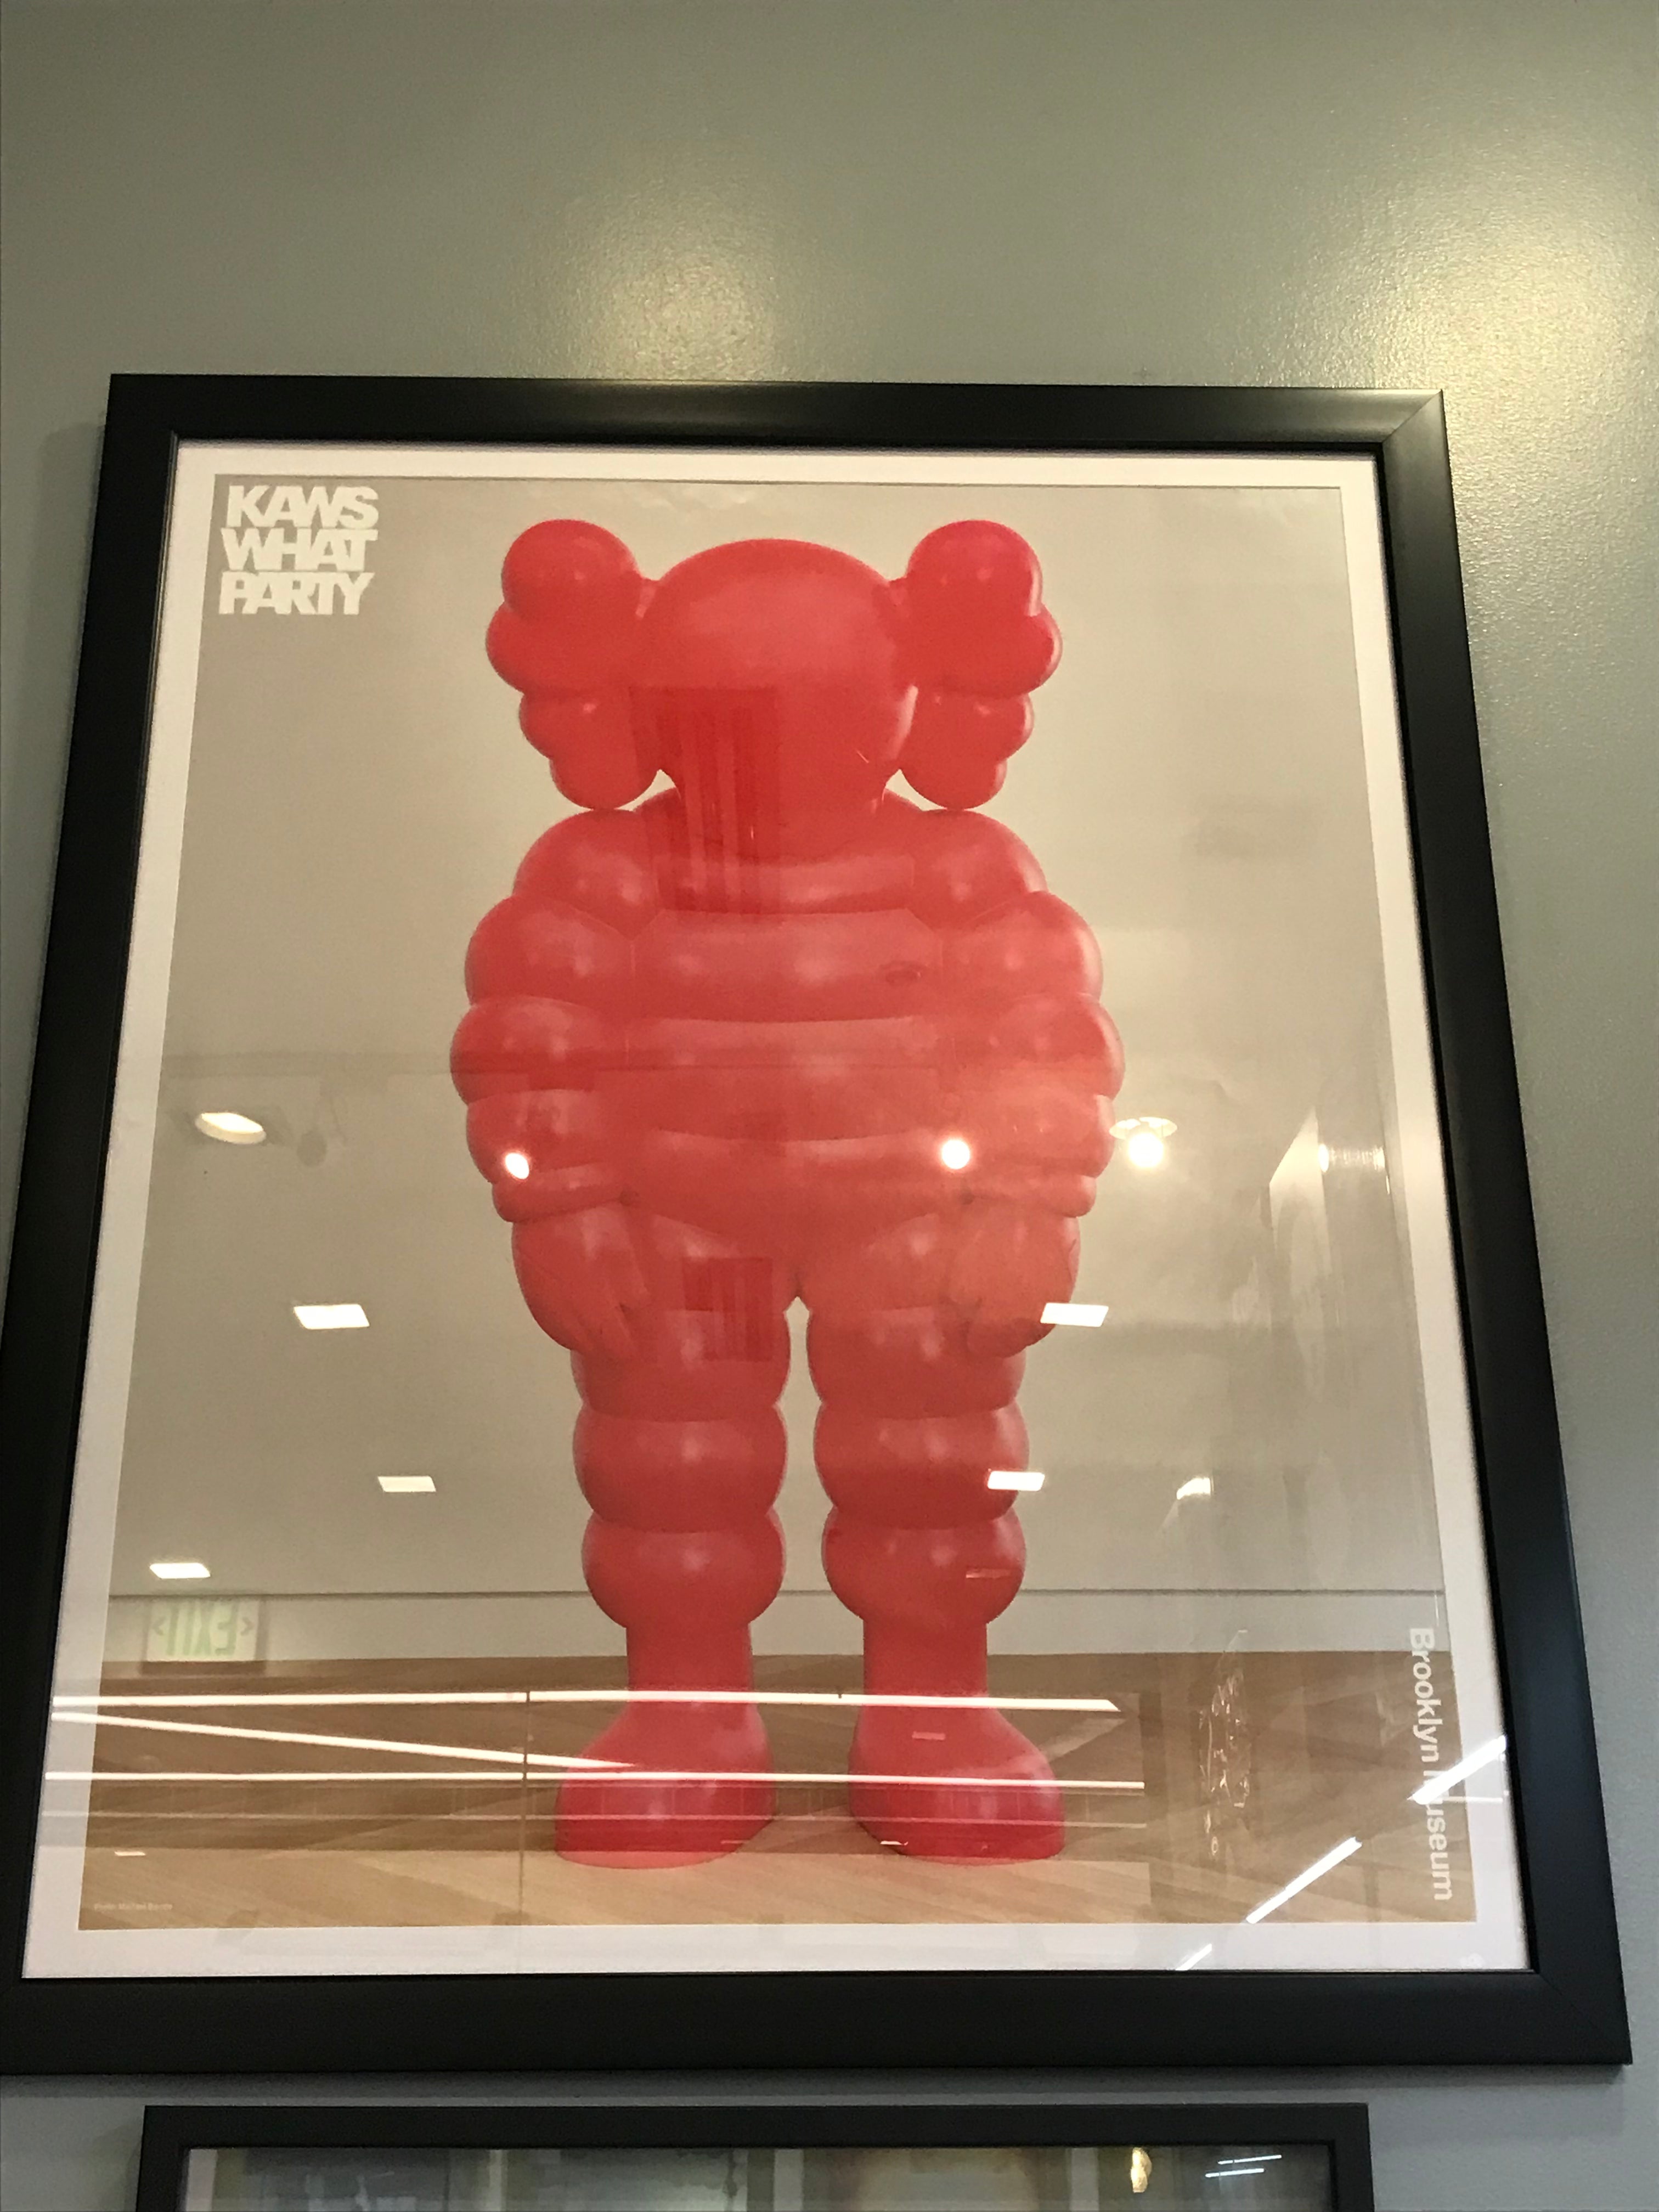 KAWS Brooklyn Museum WHAT PARTY Poster (FRAMED)